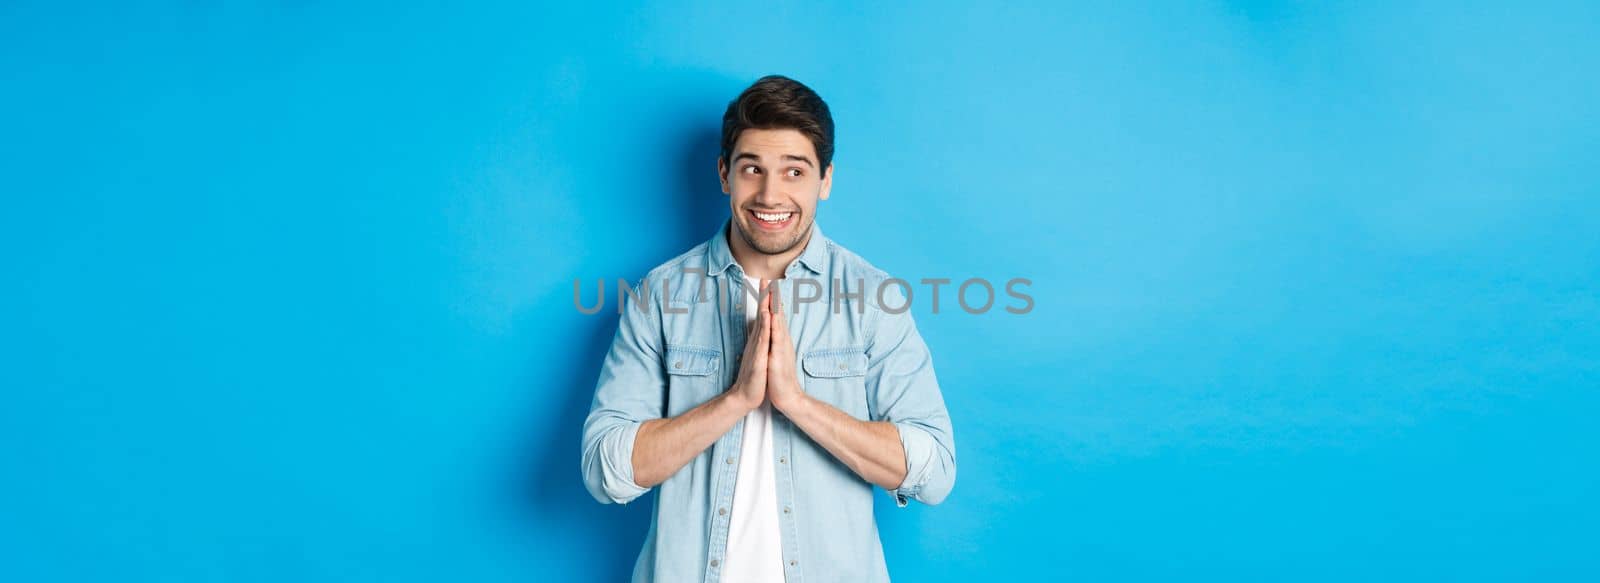 Hopeful smiling man looking left, holding hands in pray, begging for something or pleading, standing against blue background.